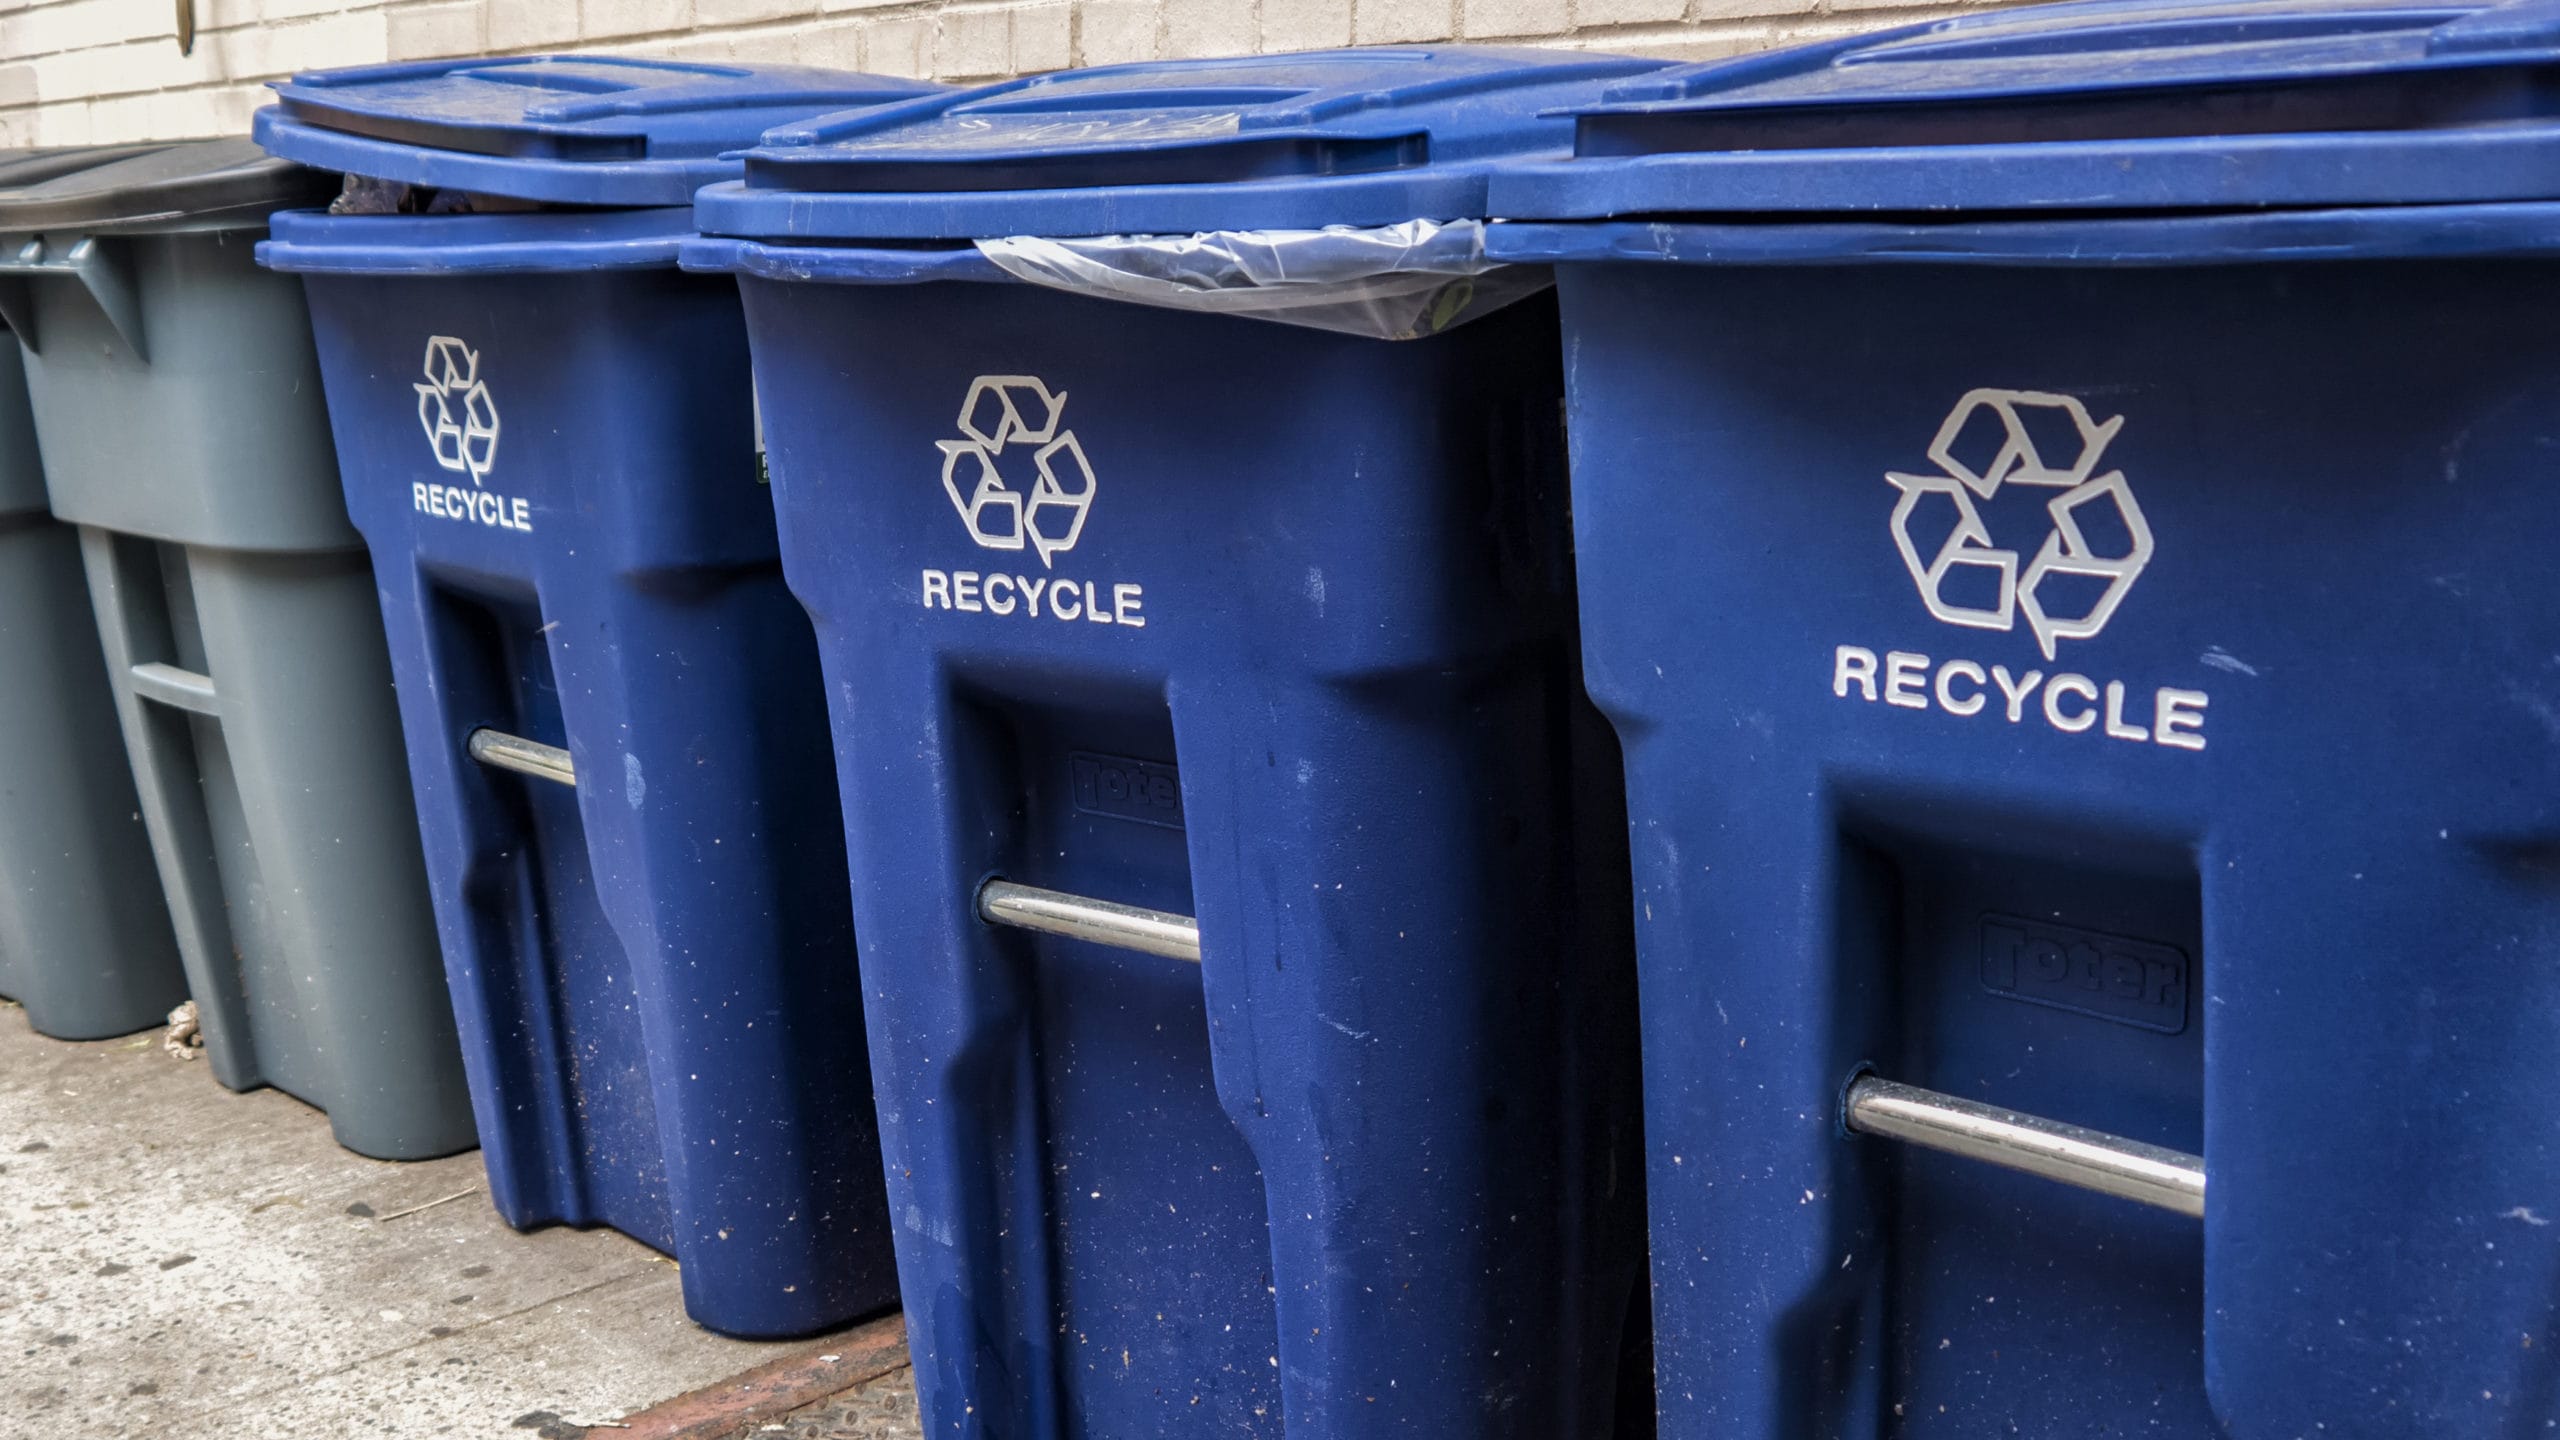 Town Sanitation, Recycling Collection Schedules For Election Day